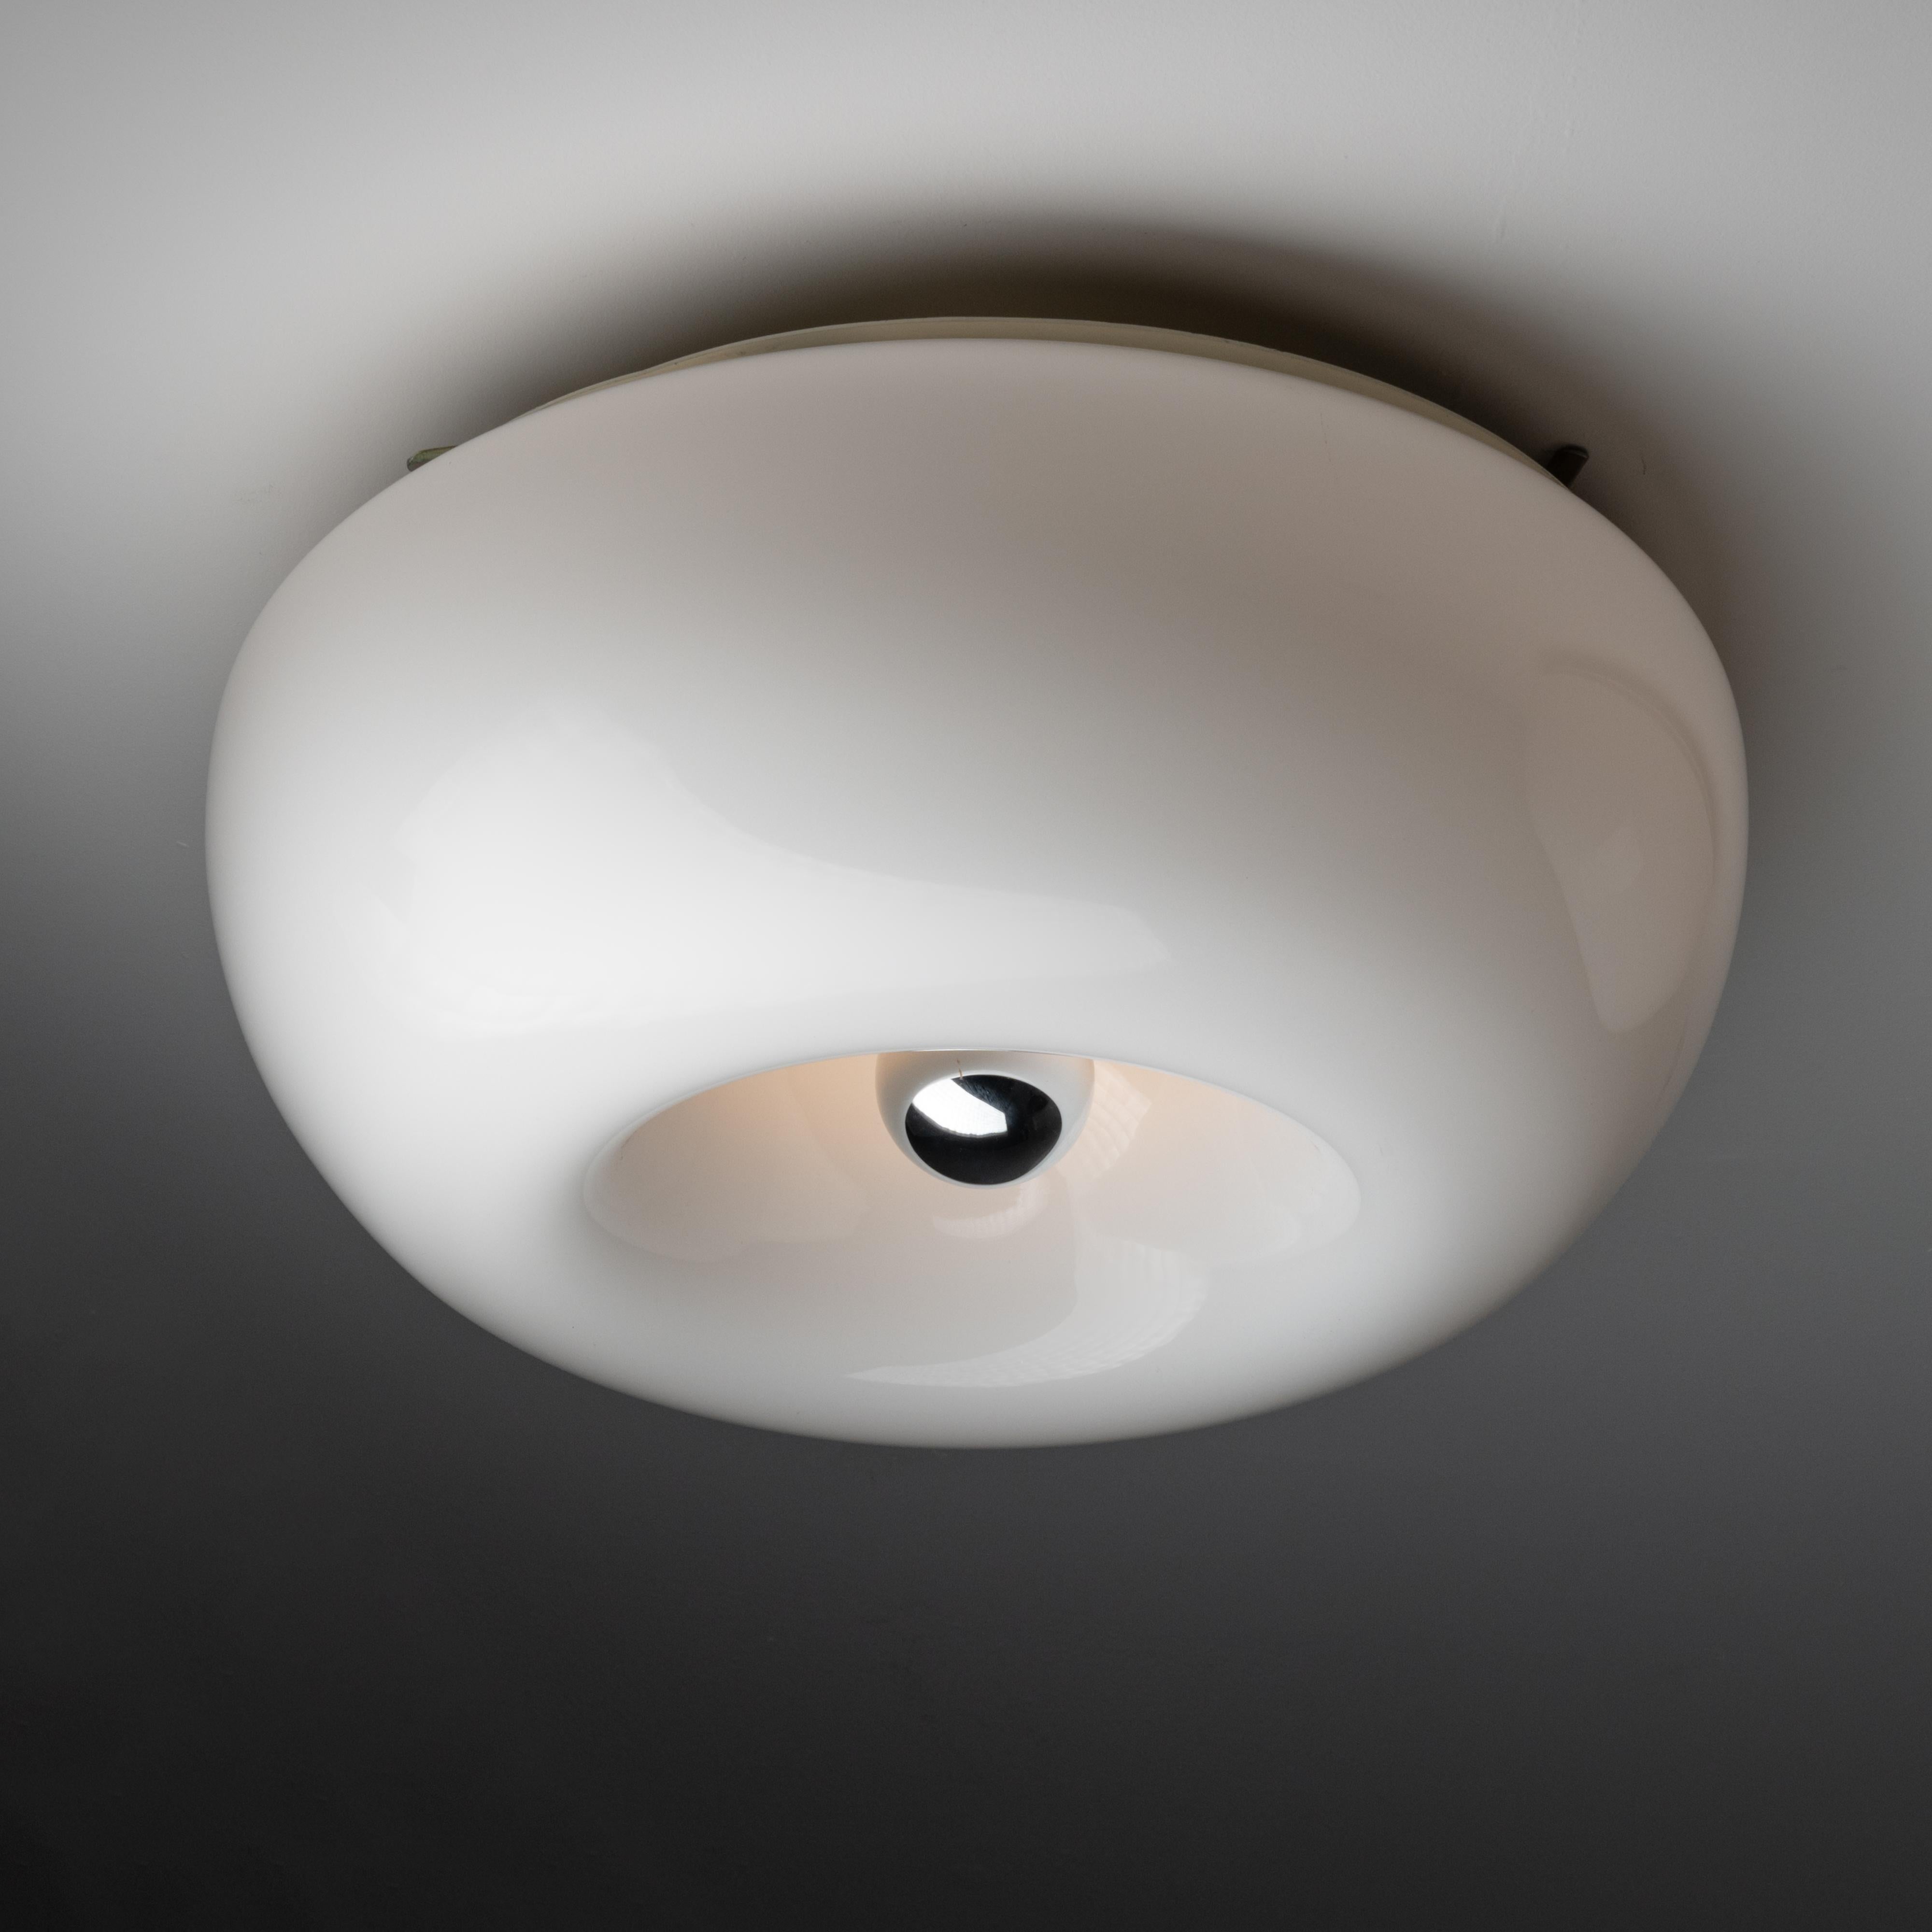 Single 'Velella' Flush Mount by Achille and Pier Giacomo Castiglioni for Flos. Designed and manufactured in Italy, circa 1967. Sculptural mushroom-like flush mount, made of hand blown milk glass. Holds three E27 sockets in the interior section and